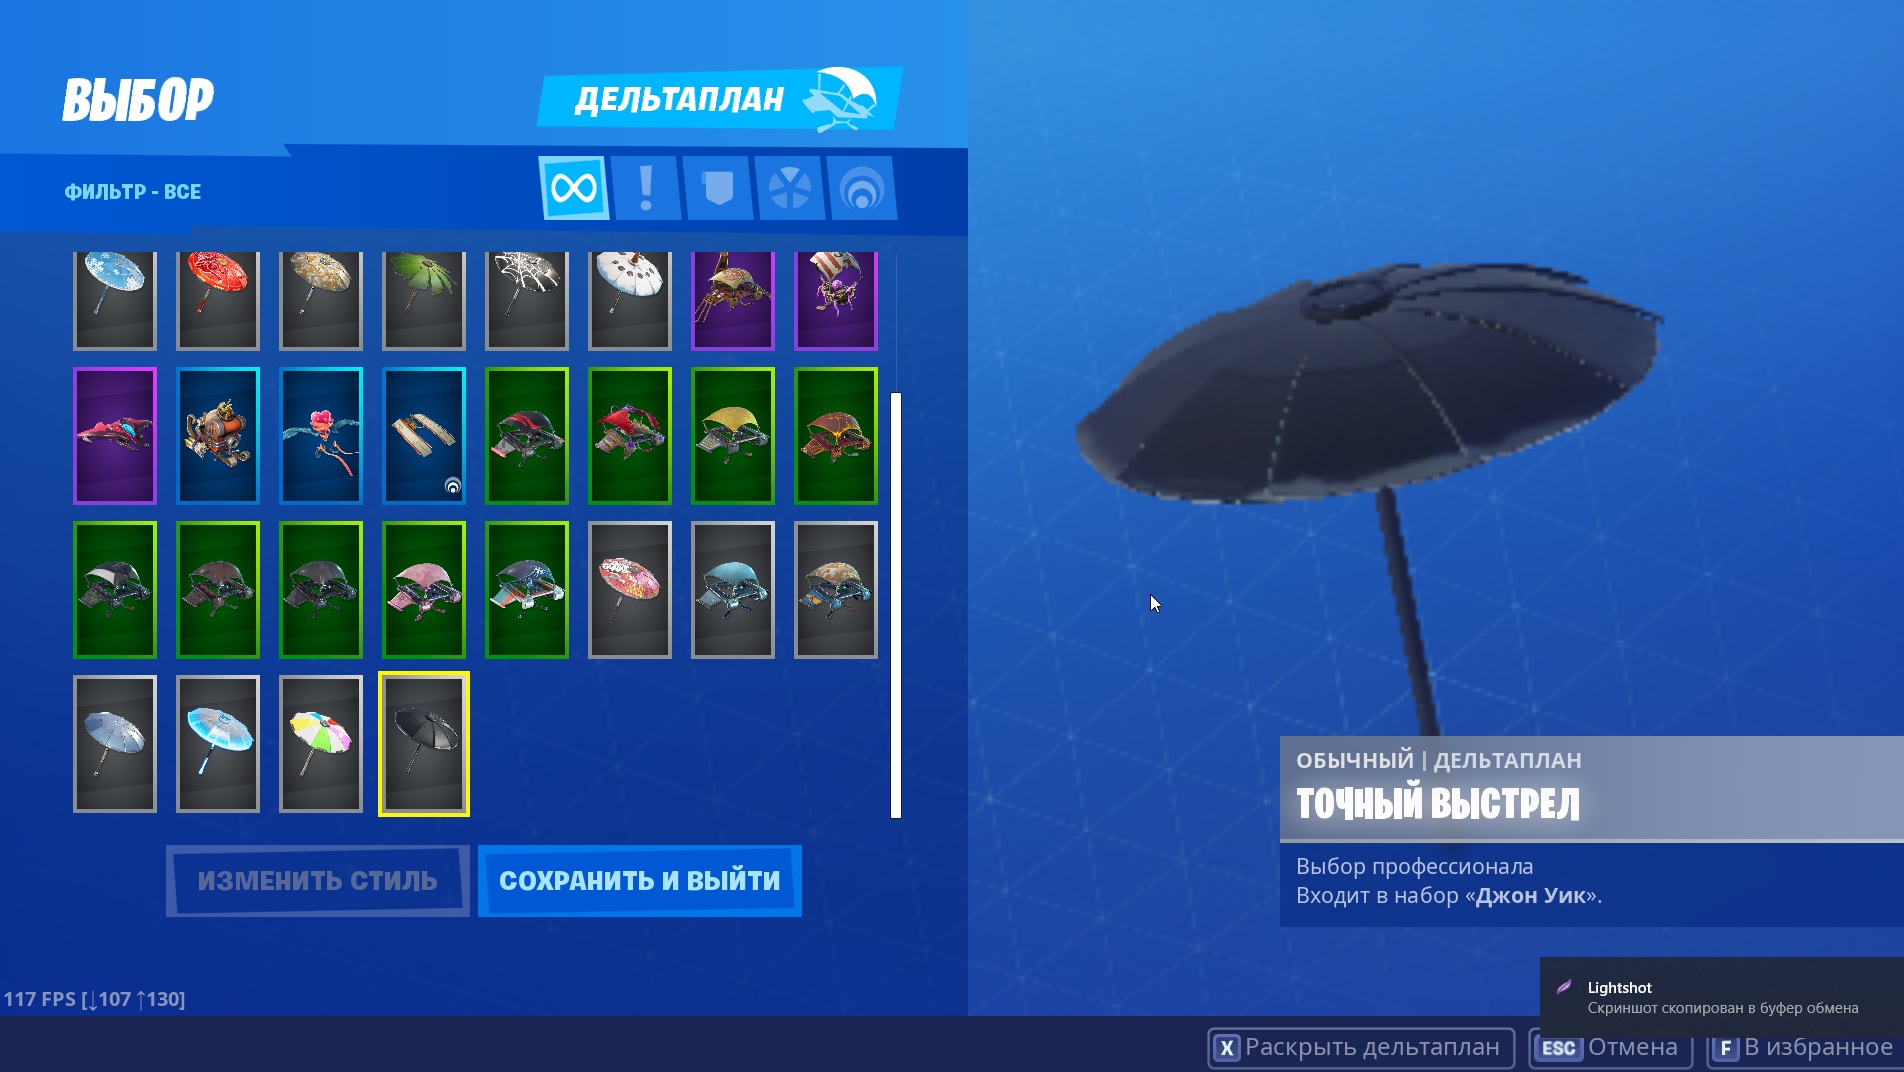 Fortnite Account All Pic Axes Selling Fortnite Account With Pve 38 Skins 28 Pickaxes And More 800 V Bucks 30 Epicnpc Marketplace